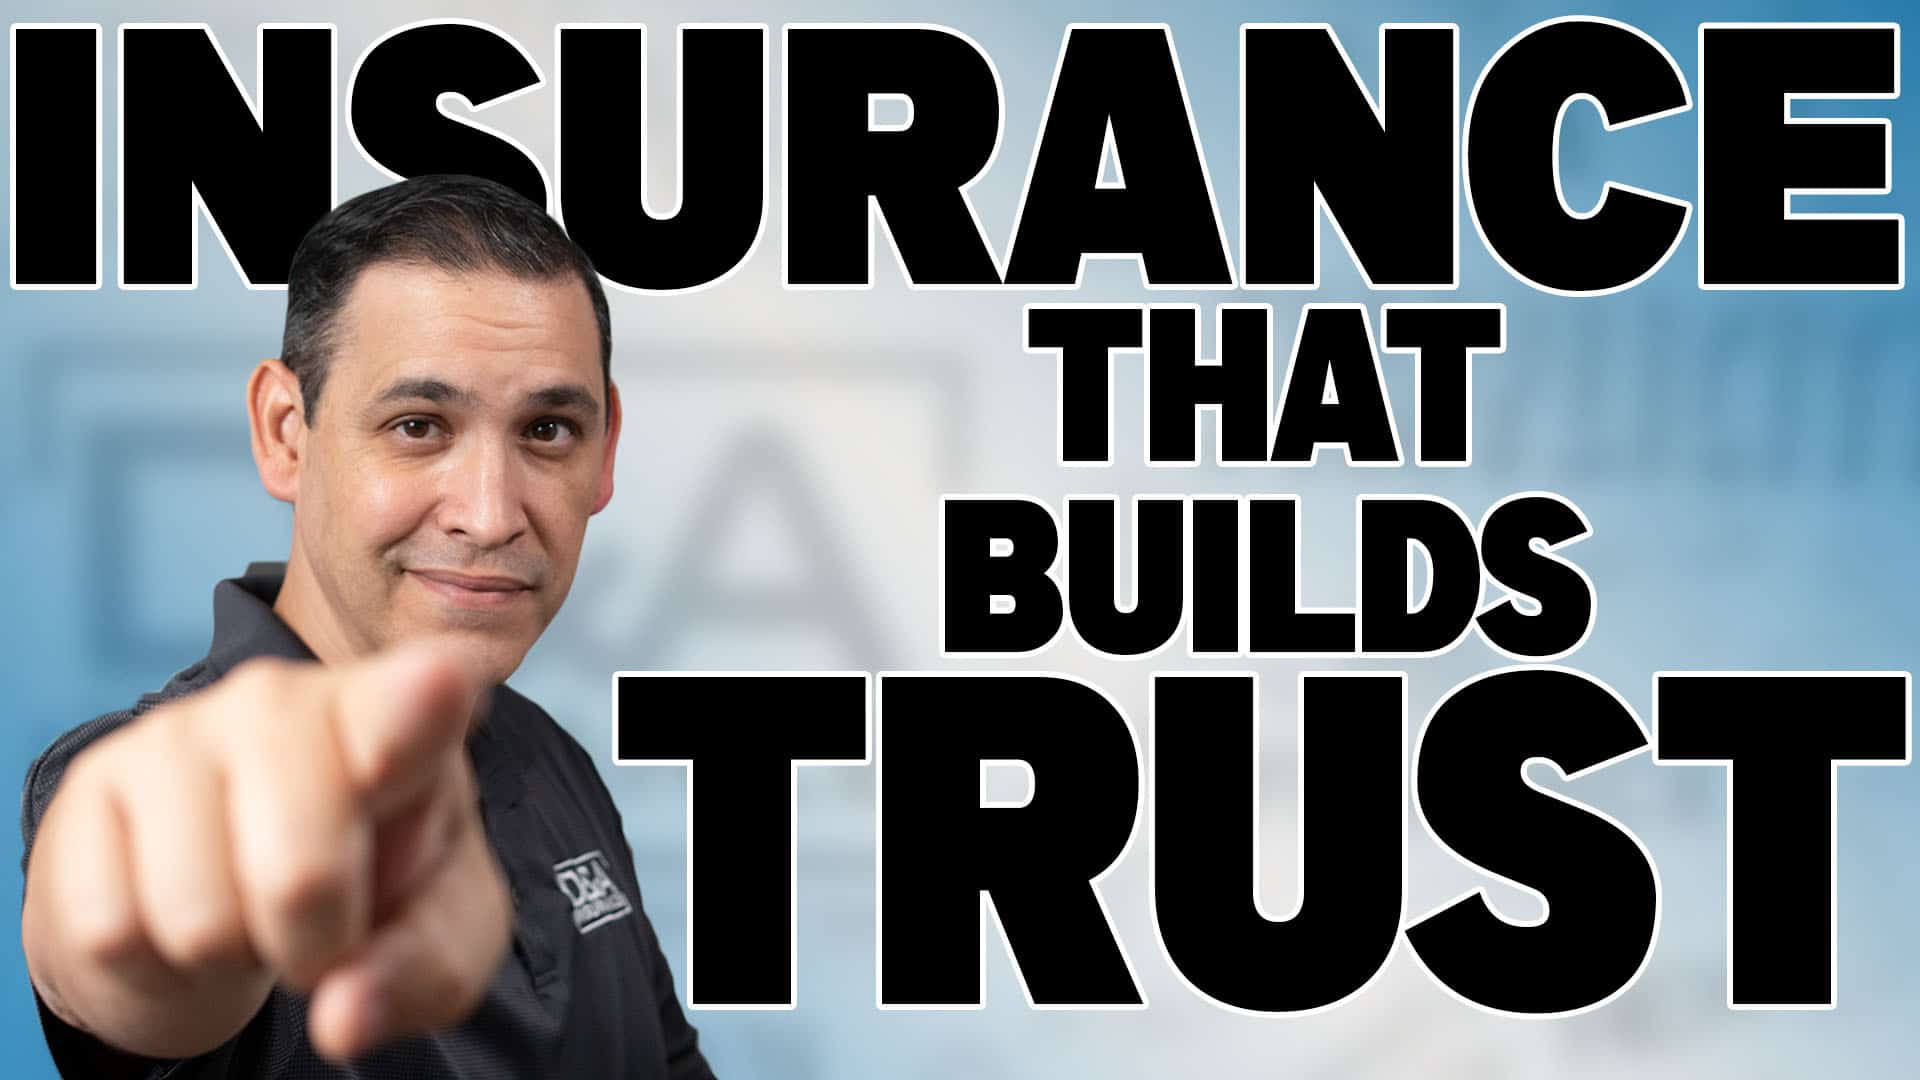 Bonded & Insured Can Build Trust with Your Customers